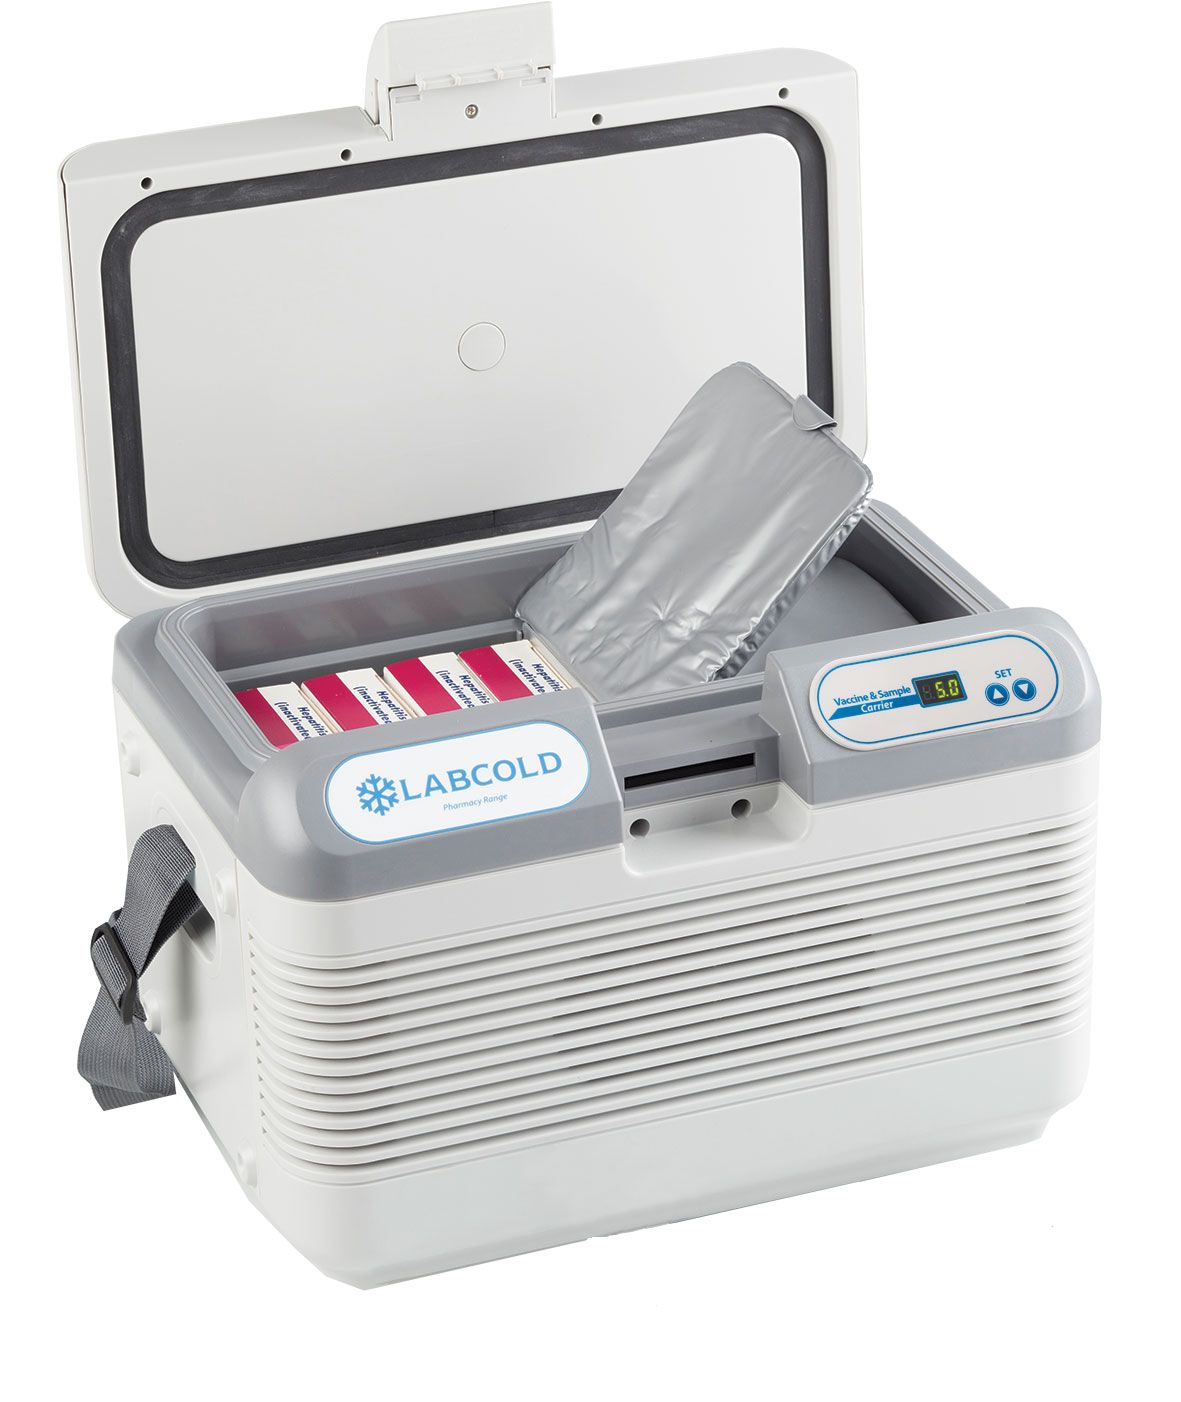 Labcold vaccine carrier can now be validated